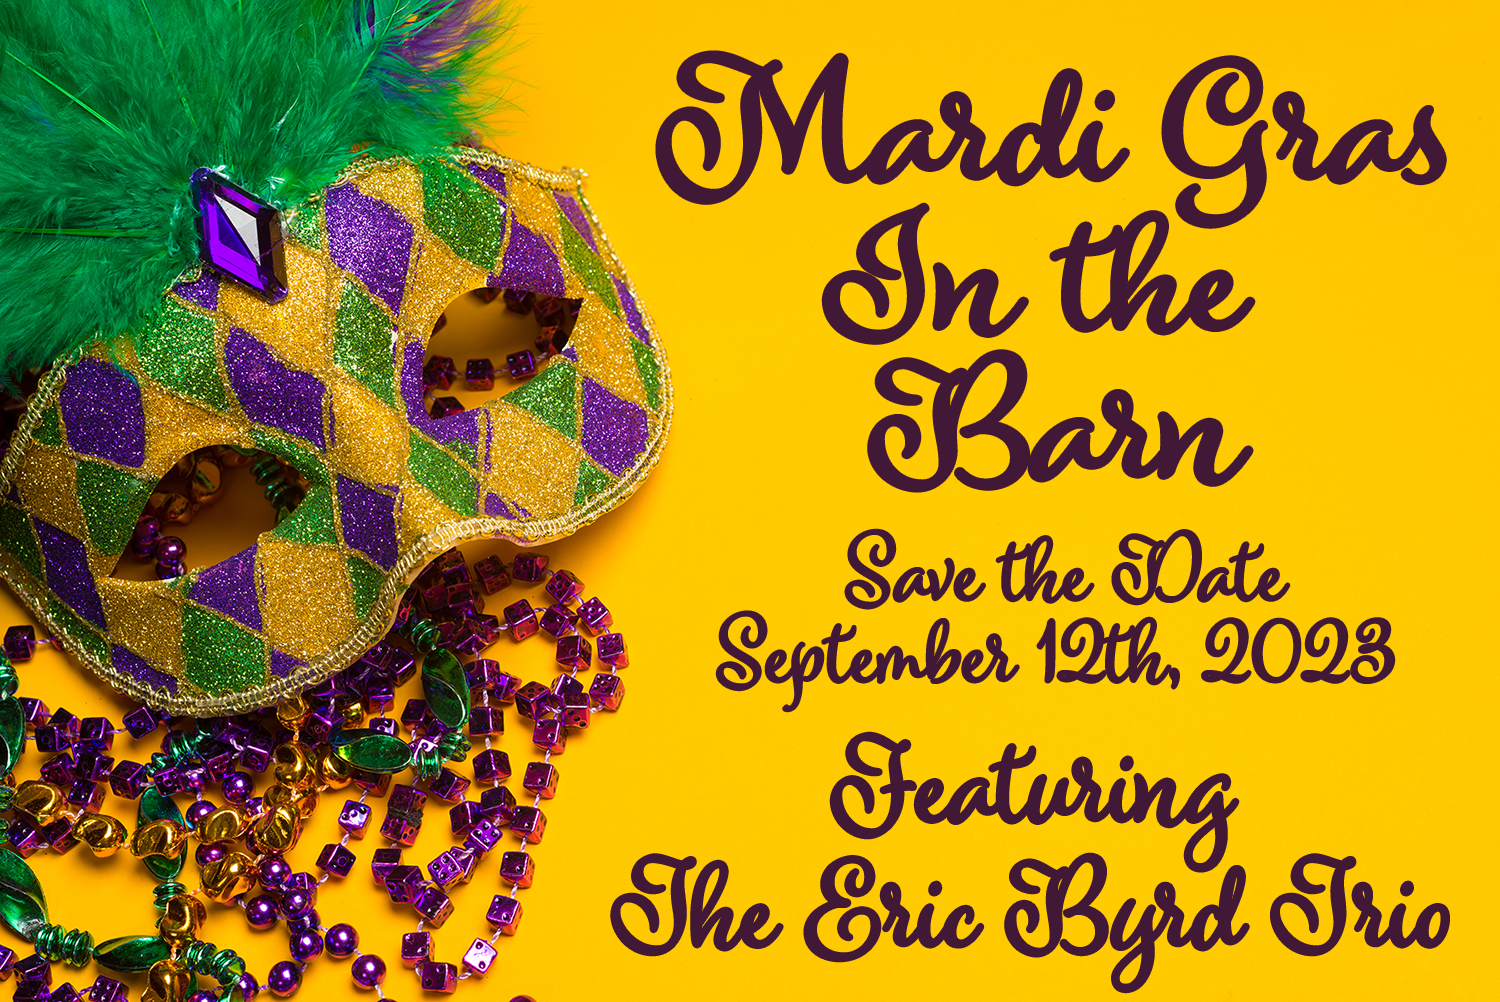 Deep Creek Watershed Events: Mardi Gras at the Barn